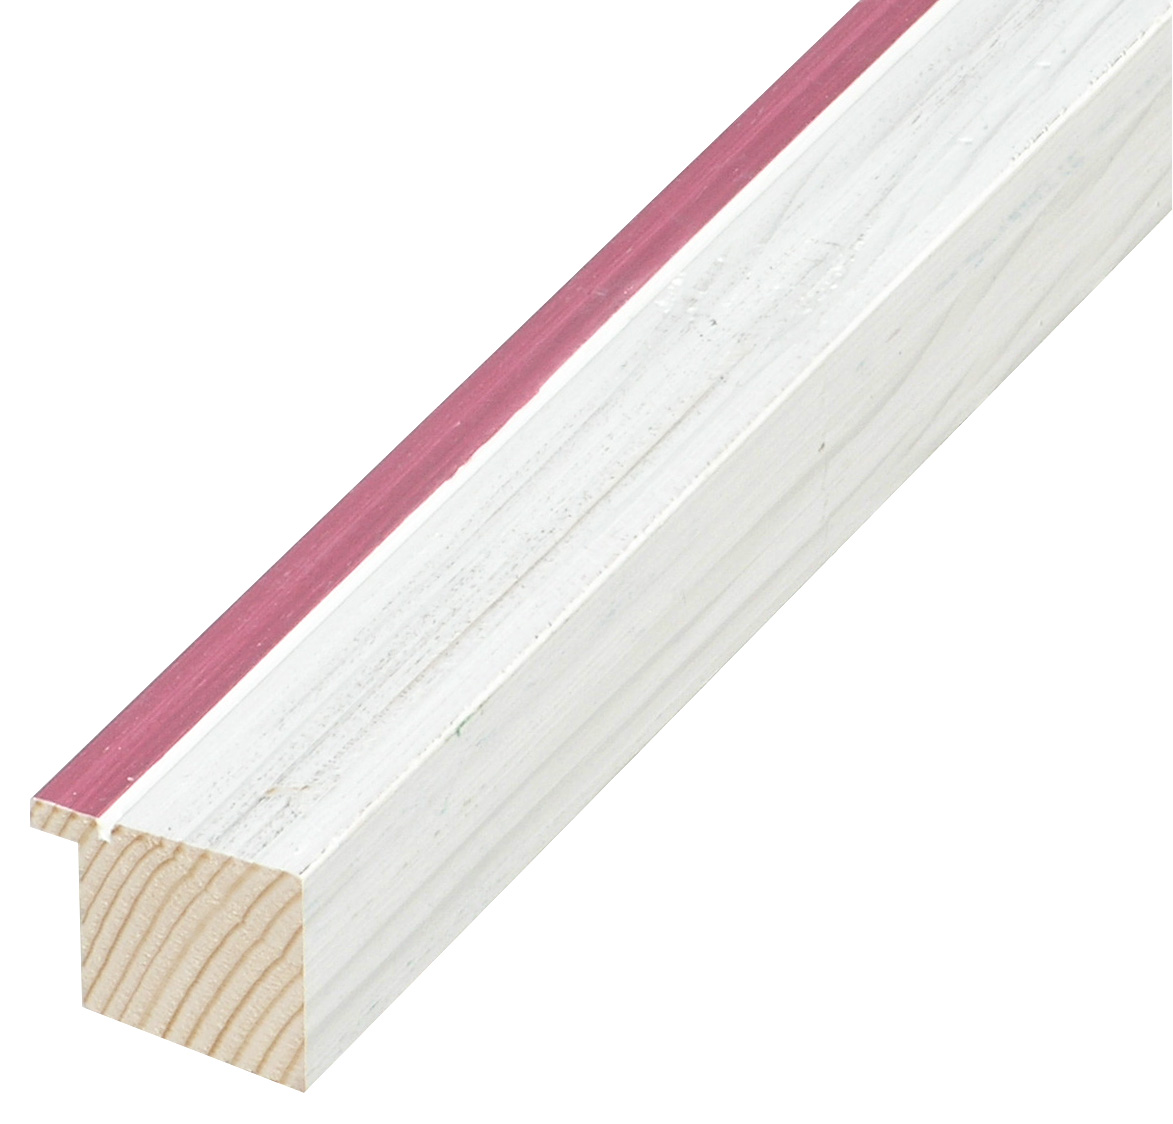 Moulding finger-jointed pine height 33mm - White, fucsia edge - 716FUCSIA